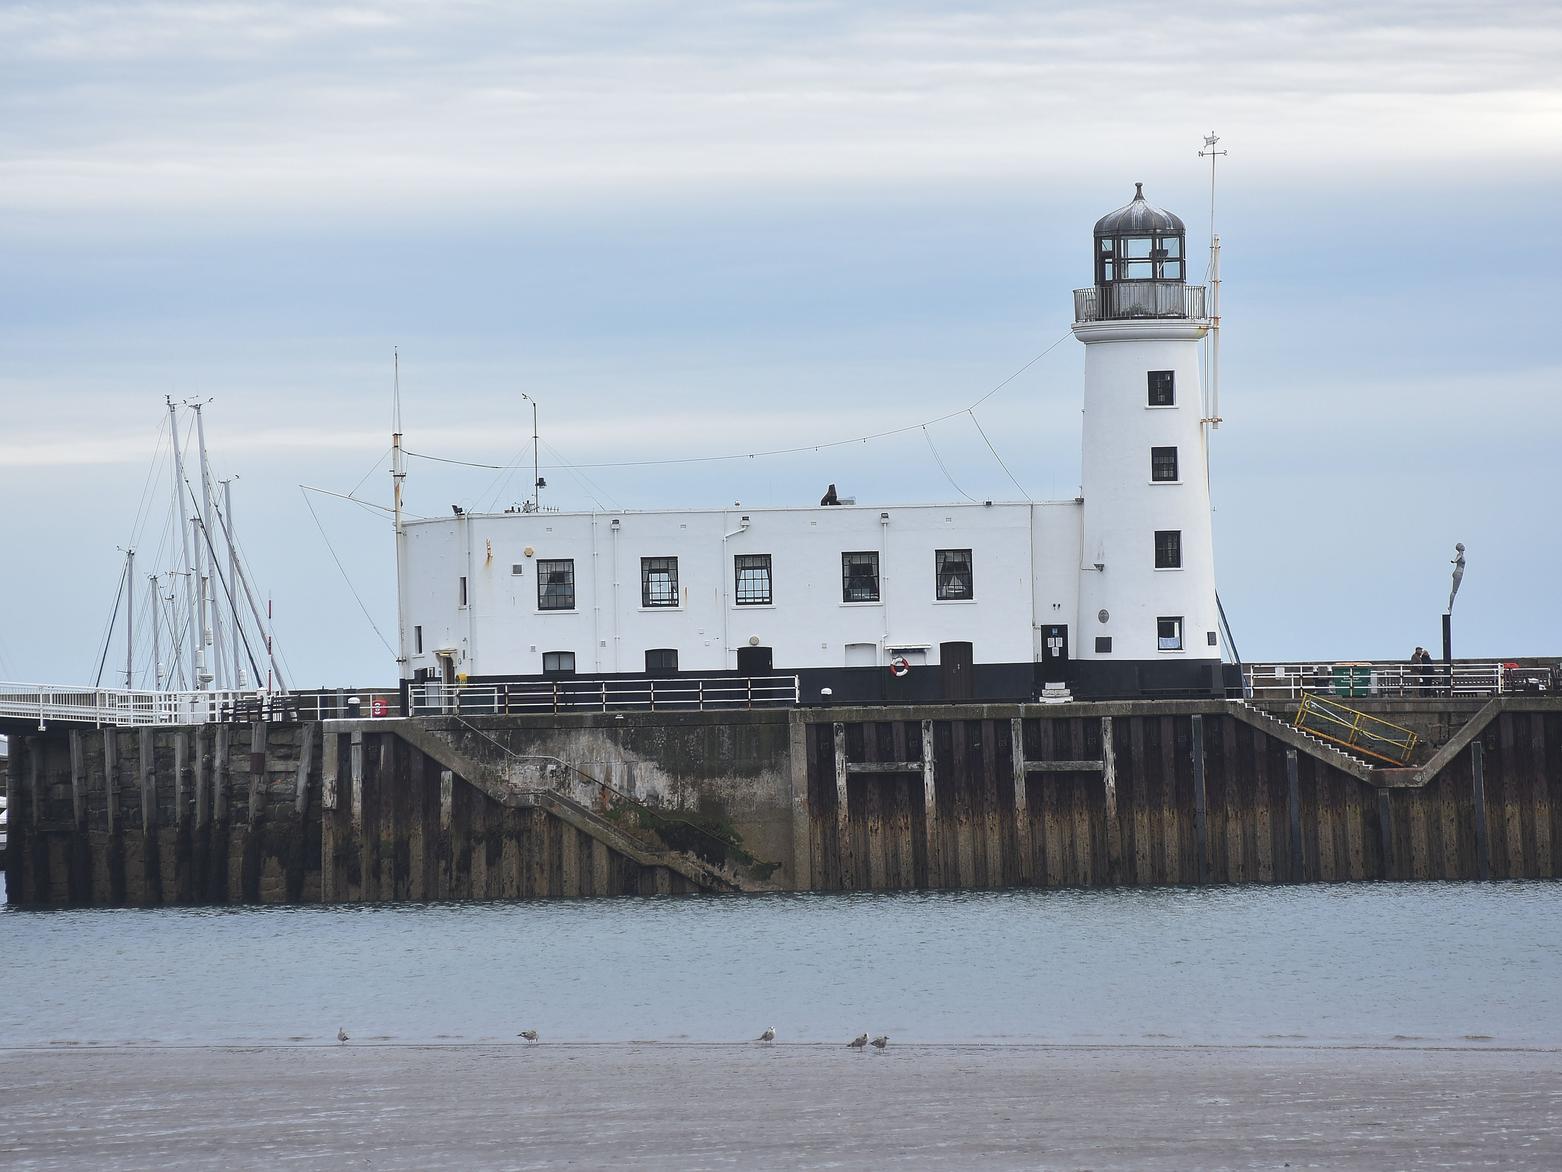 Built at the start of the 19th century, the lighthouse is one of the town's iconic structures.